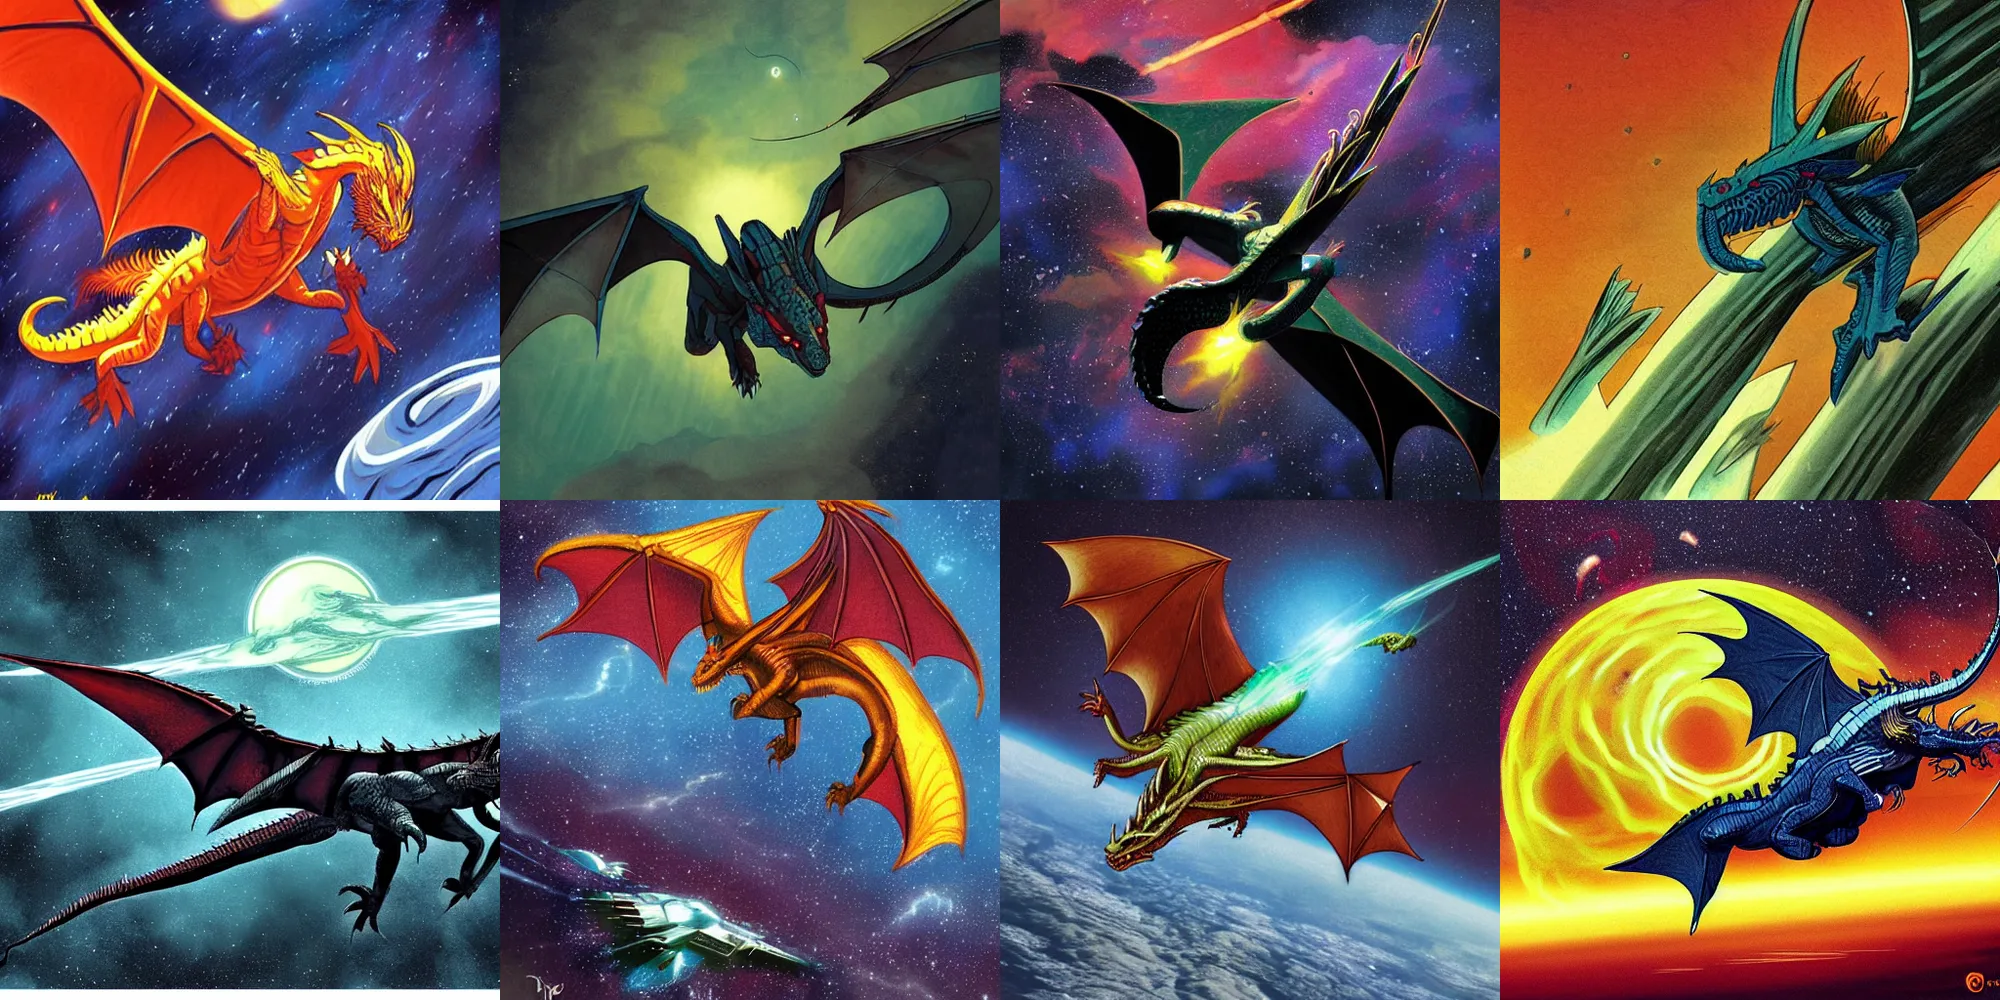 Prompt: A dragon flying through space, in the style of Vincent DiFate and Jim Burns